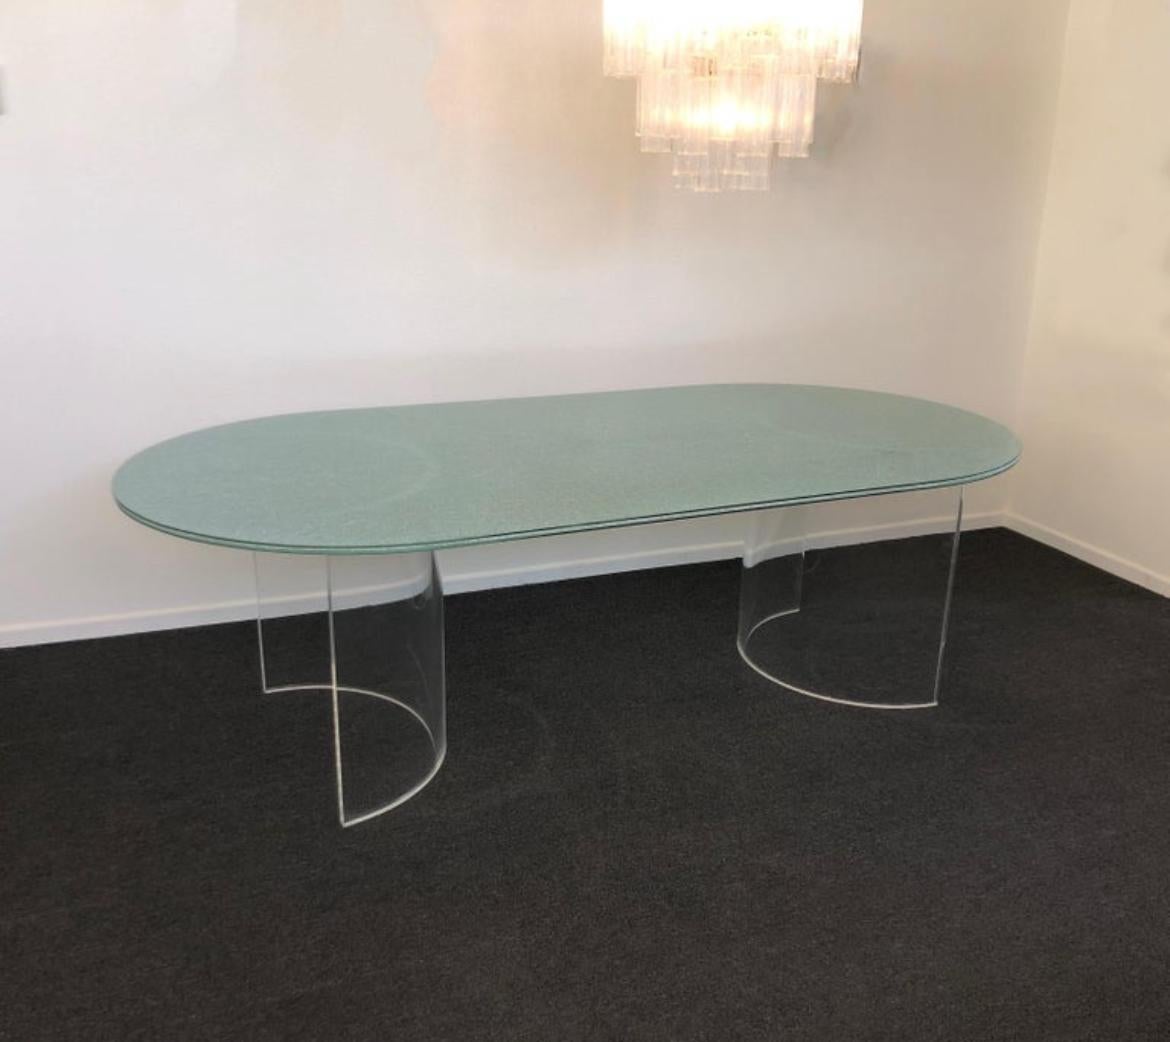 American Racetrack Crackle Glass and Lucite Dining Table by Steve Chase